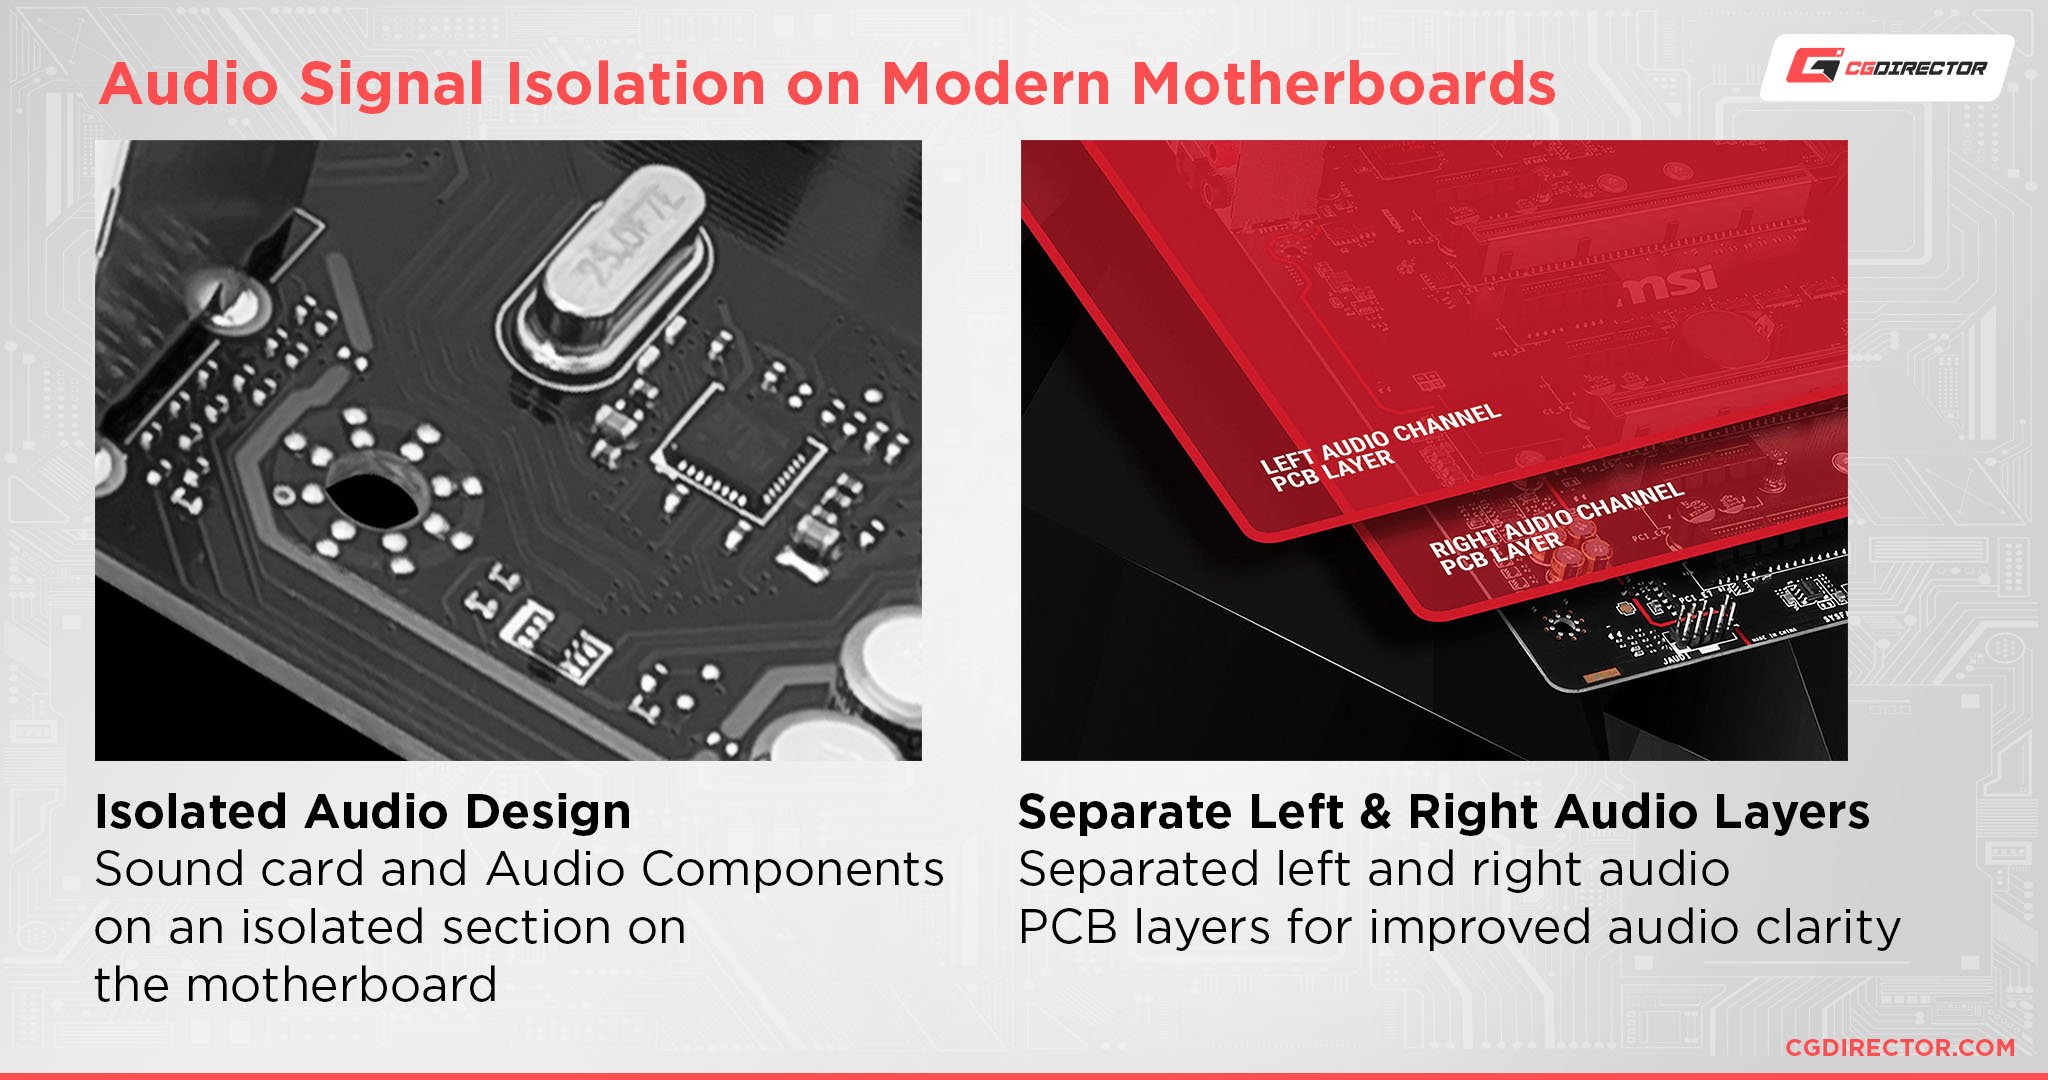 Audio Signal Isolation on Modern Motherboards